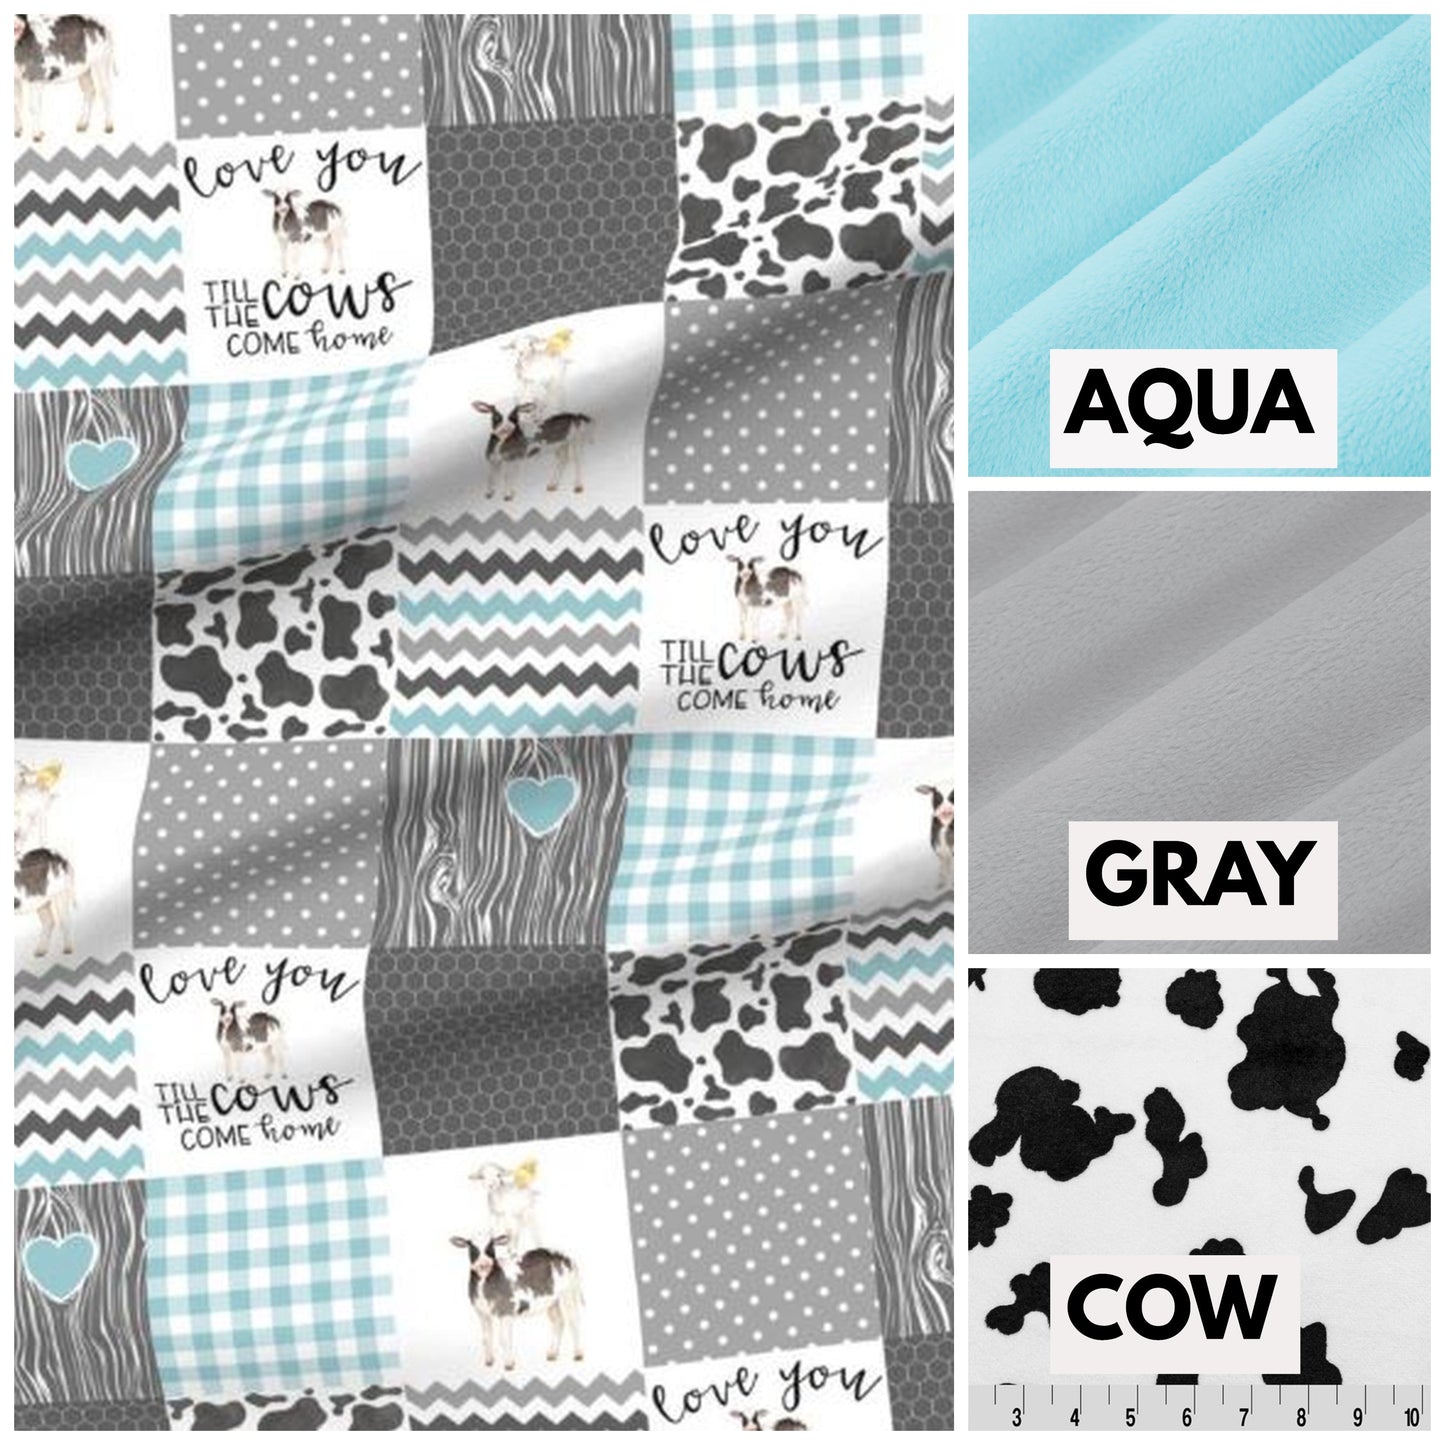 aqua, gray or cow print minky available for the back of the blanket